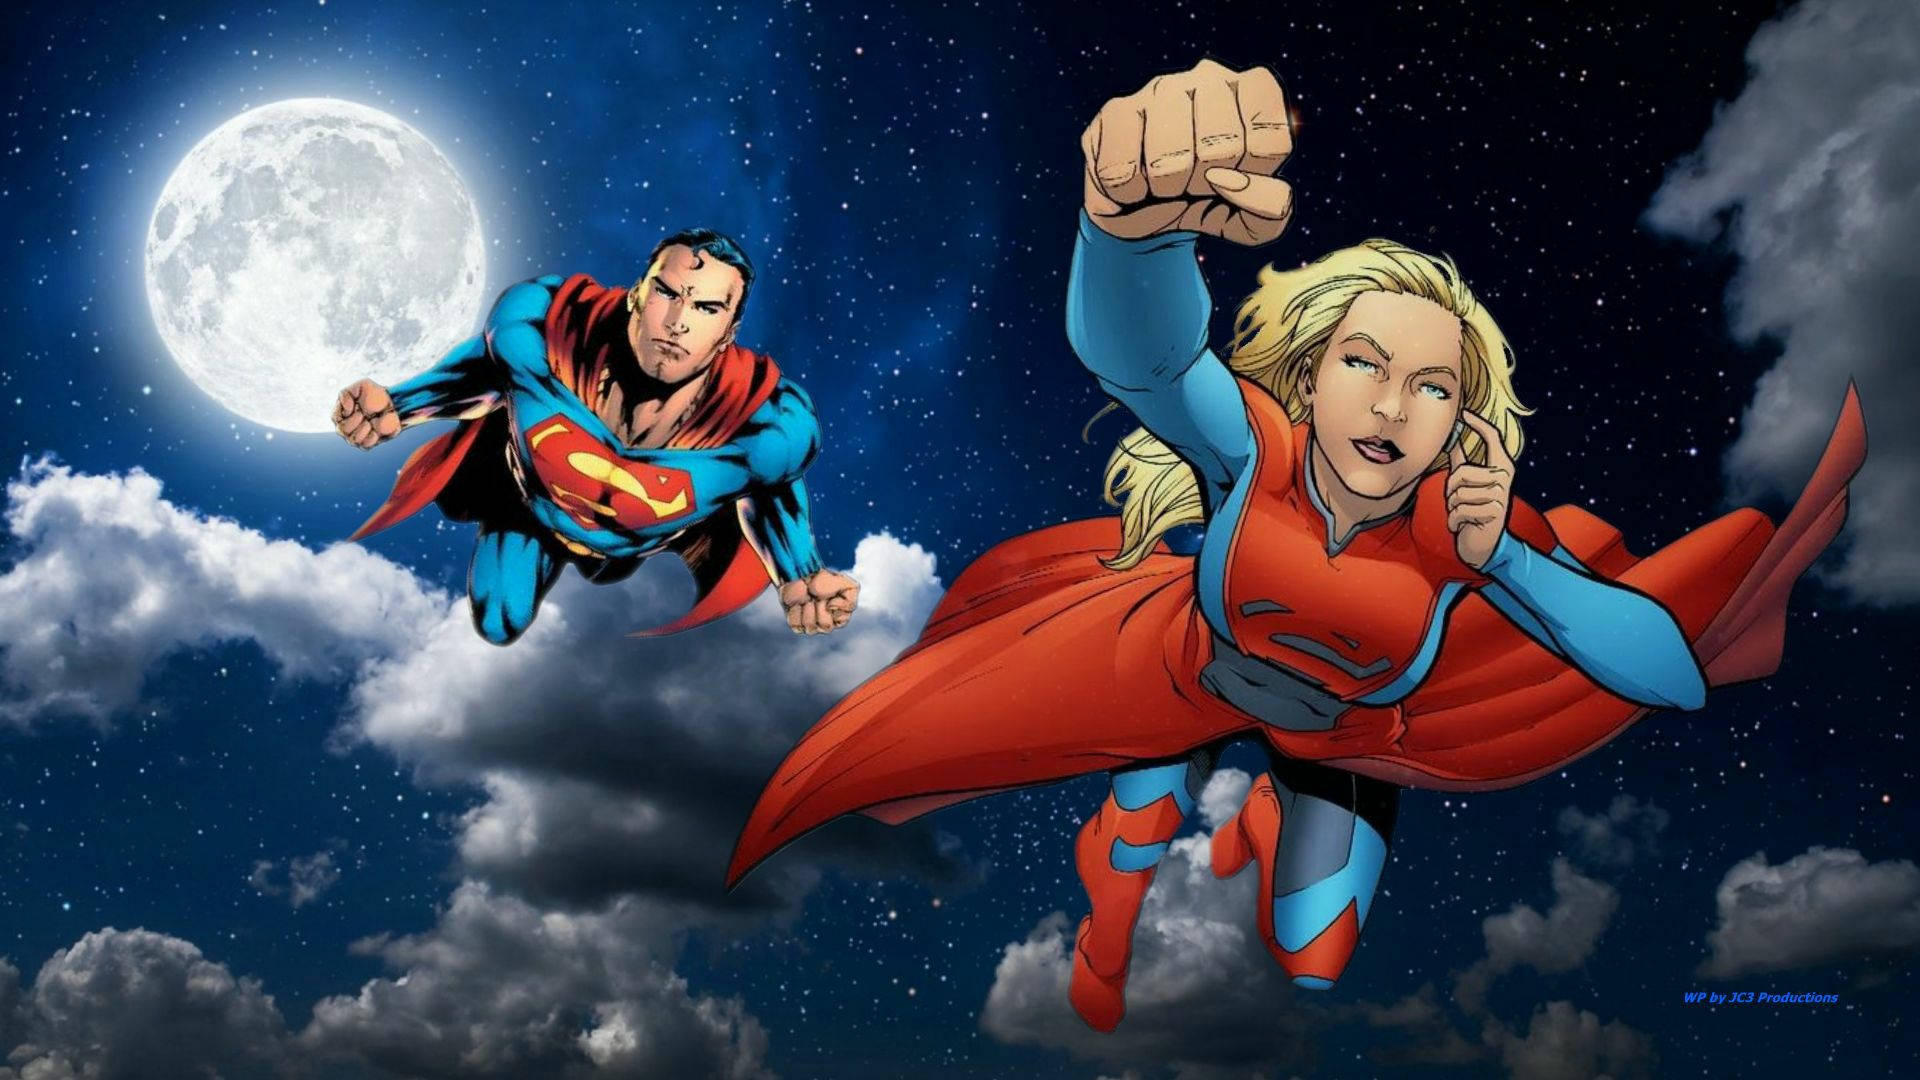 Supergirl And Superman Above Clouds Wallpaper